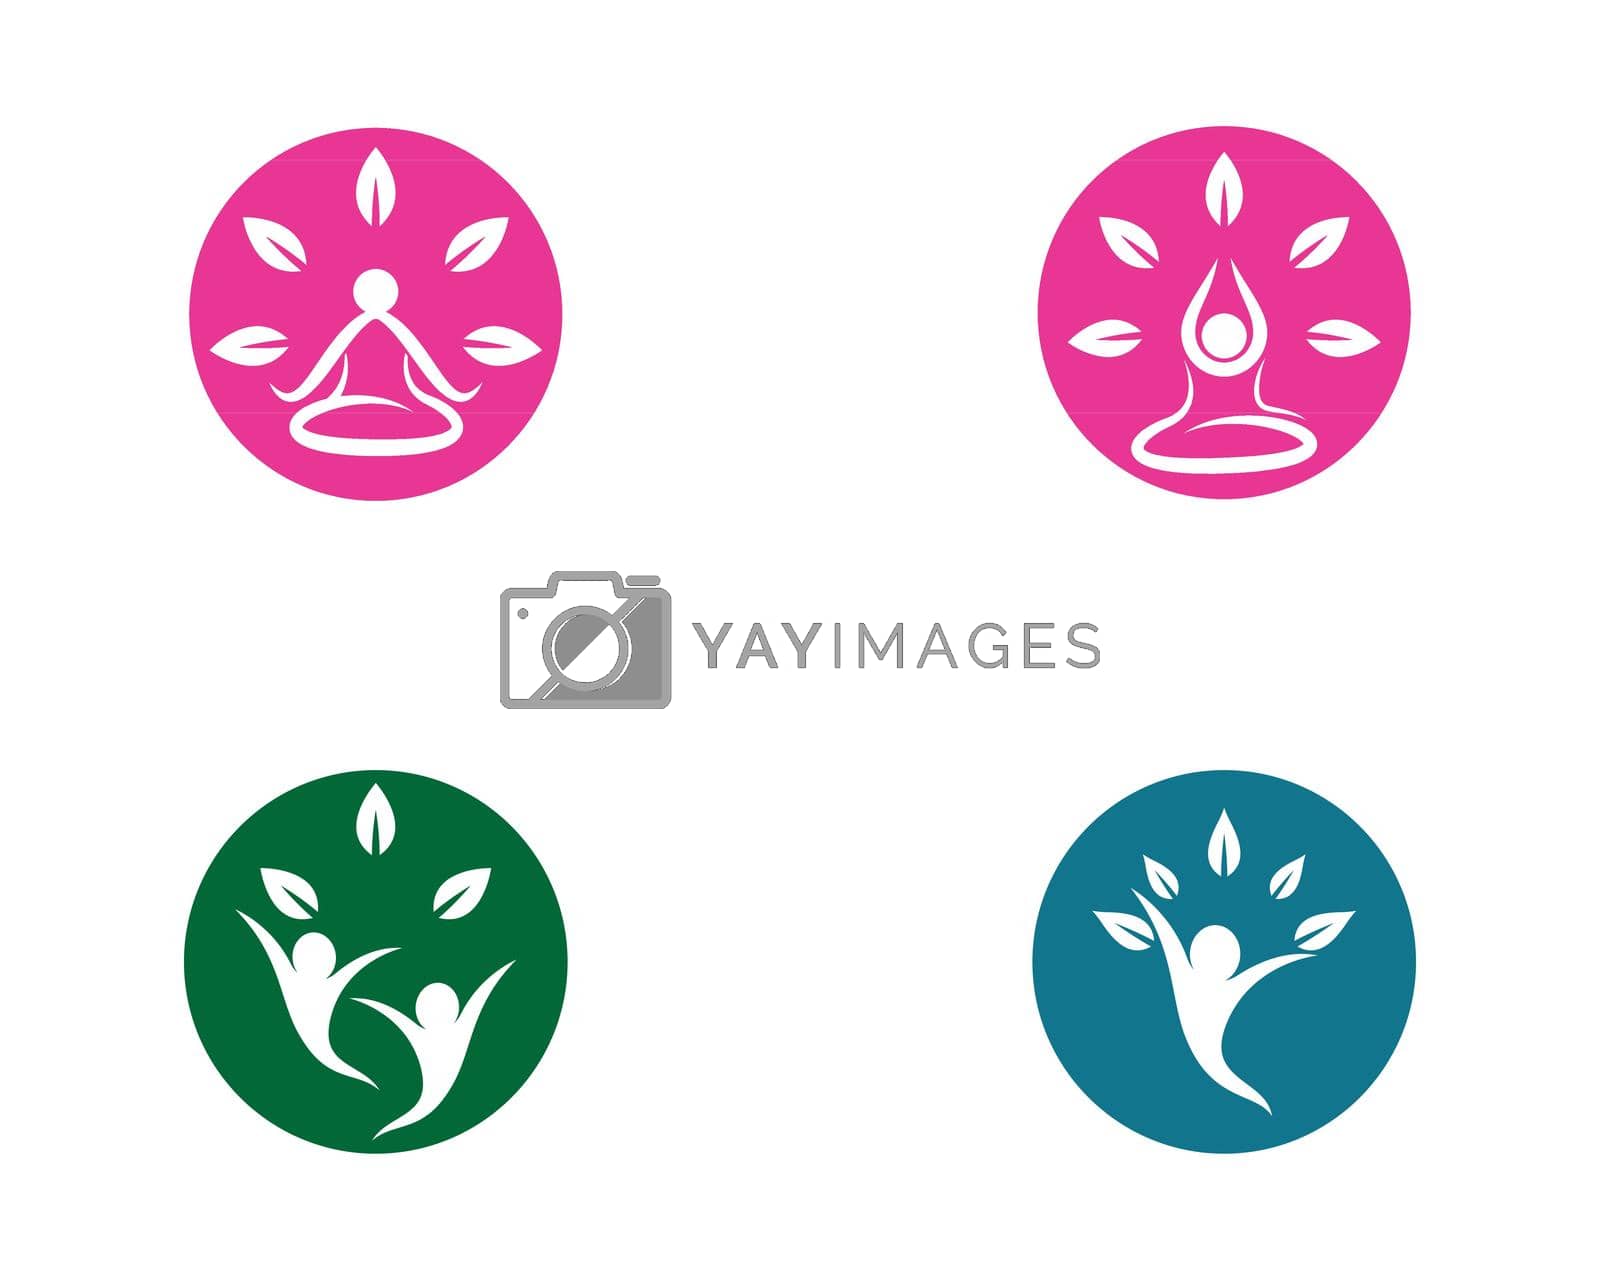 Royalty free image of Wellnes symbol vector icon by Fat17